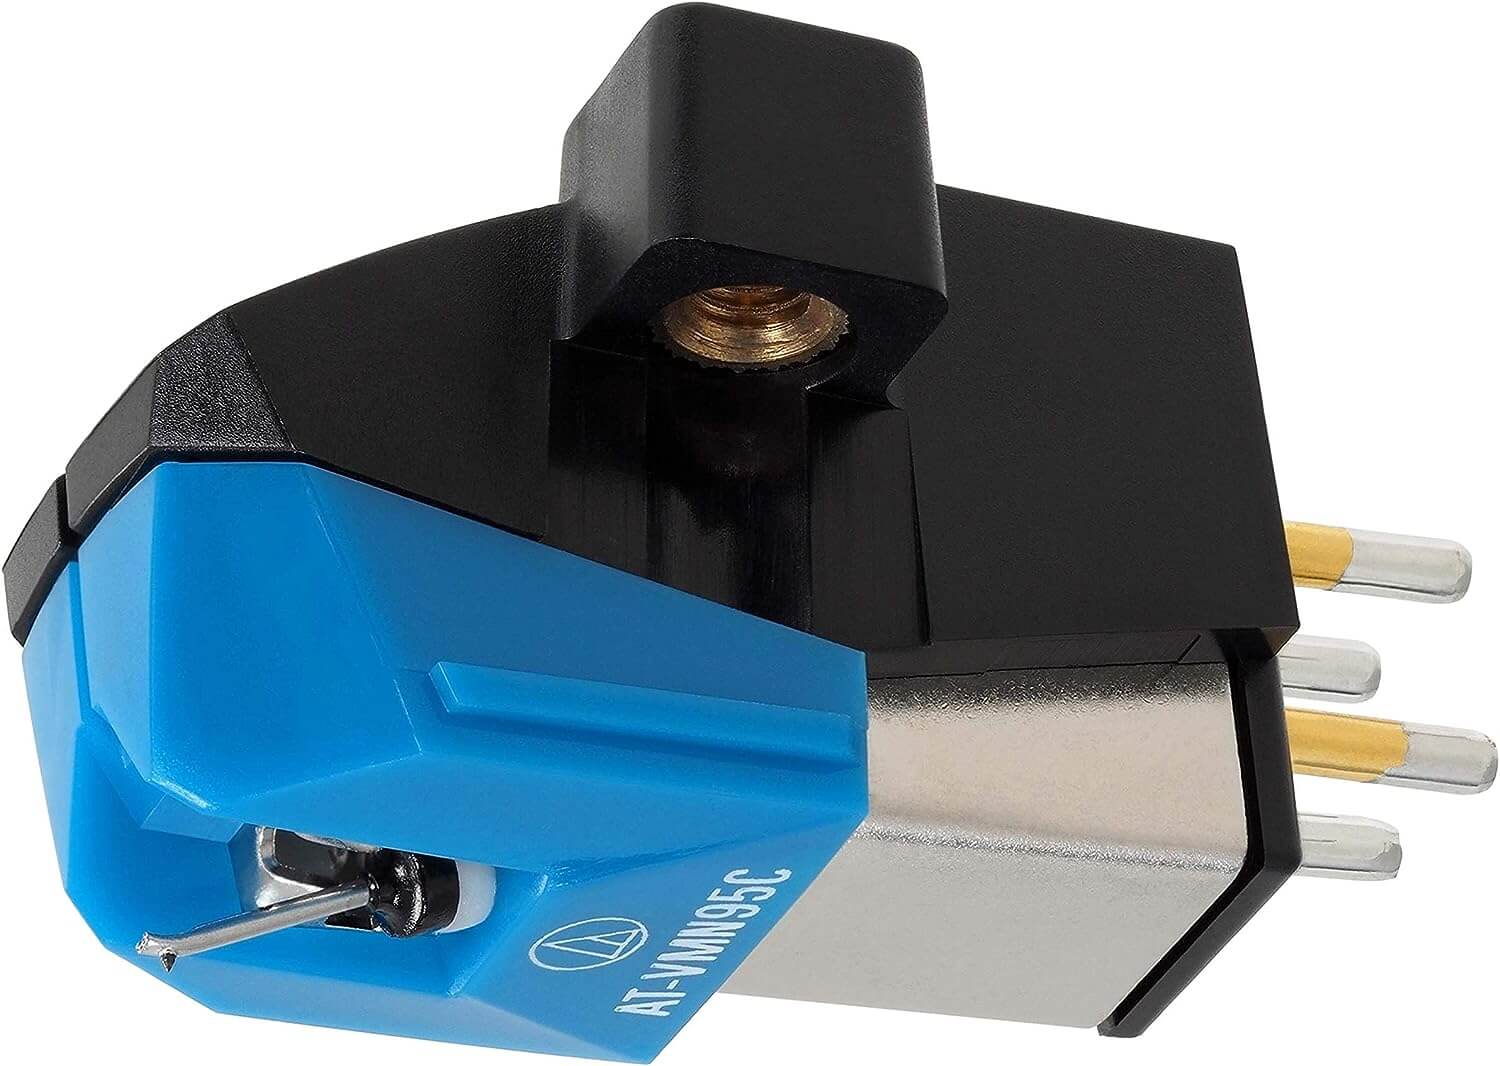 mm or moving magnet cartridge